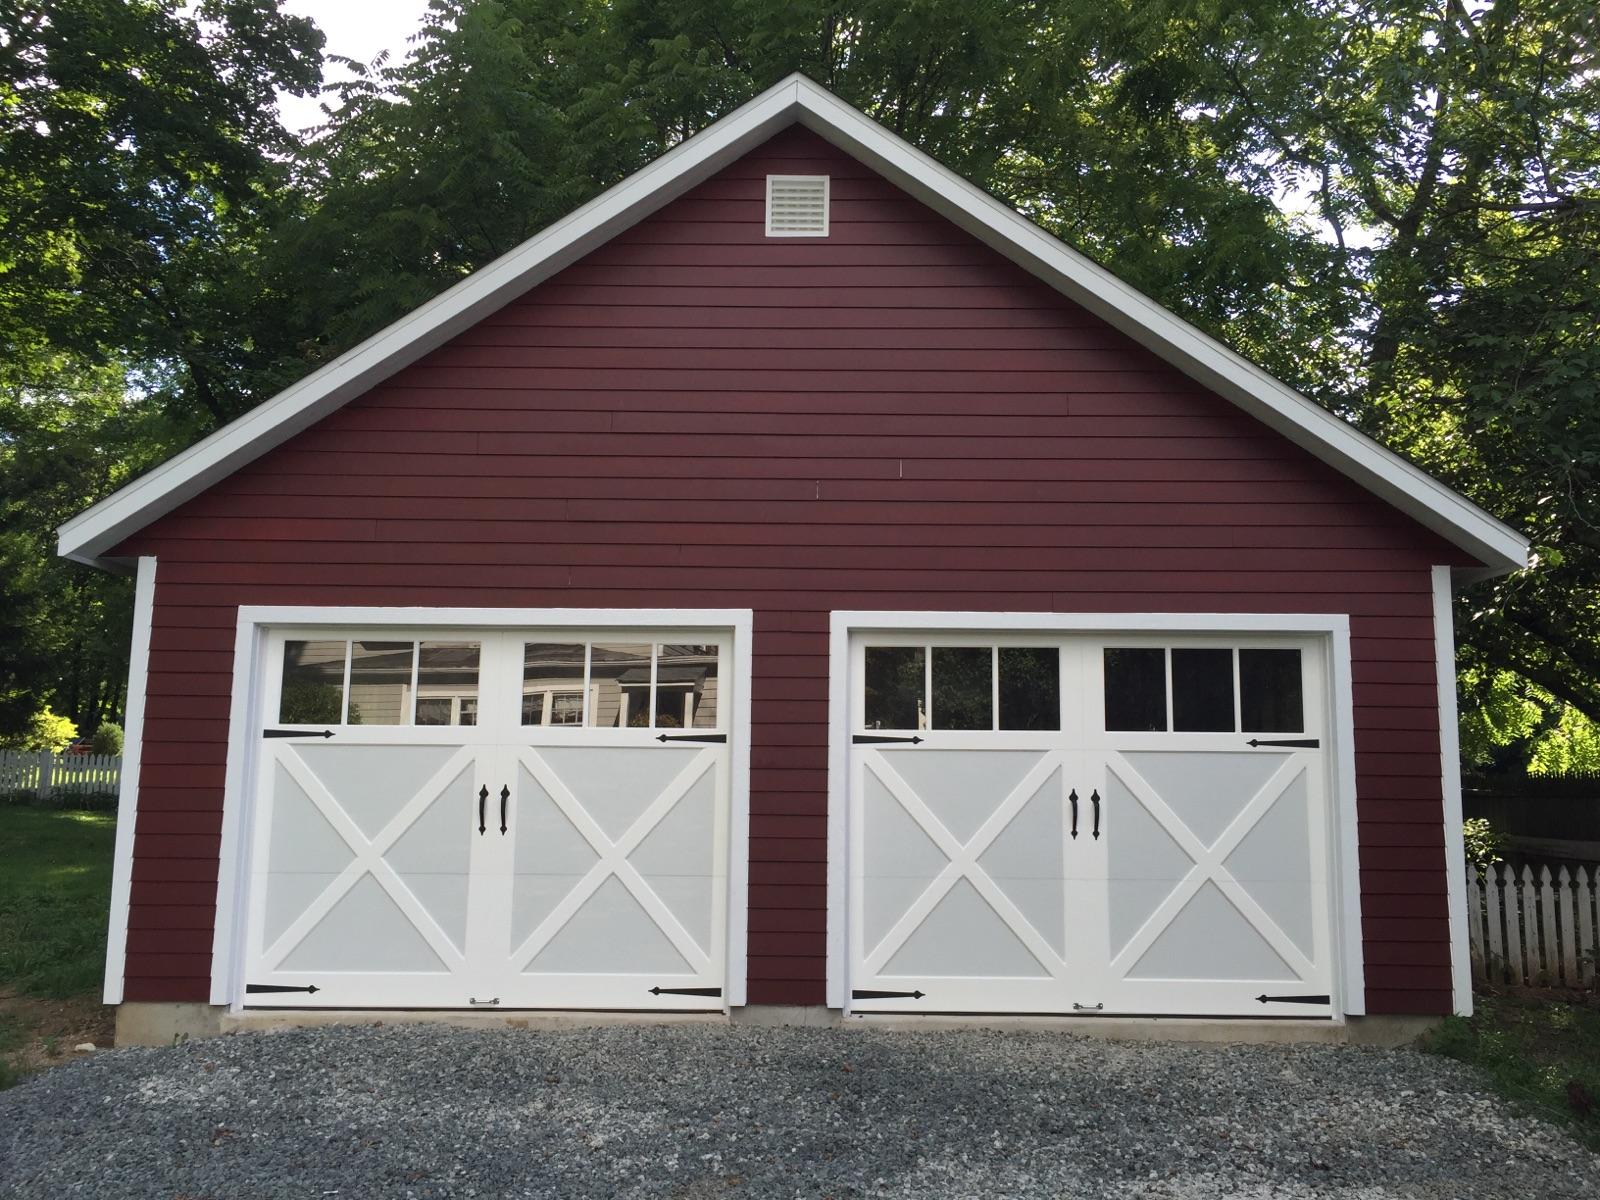 24x24-with-LP-SmarLap-Siding-CSX-Carriage-Style-garage-doors-and-8-12-attic-truss-package-2